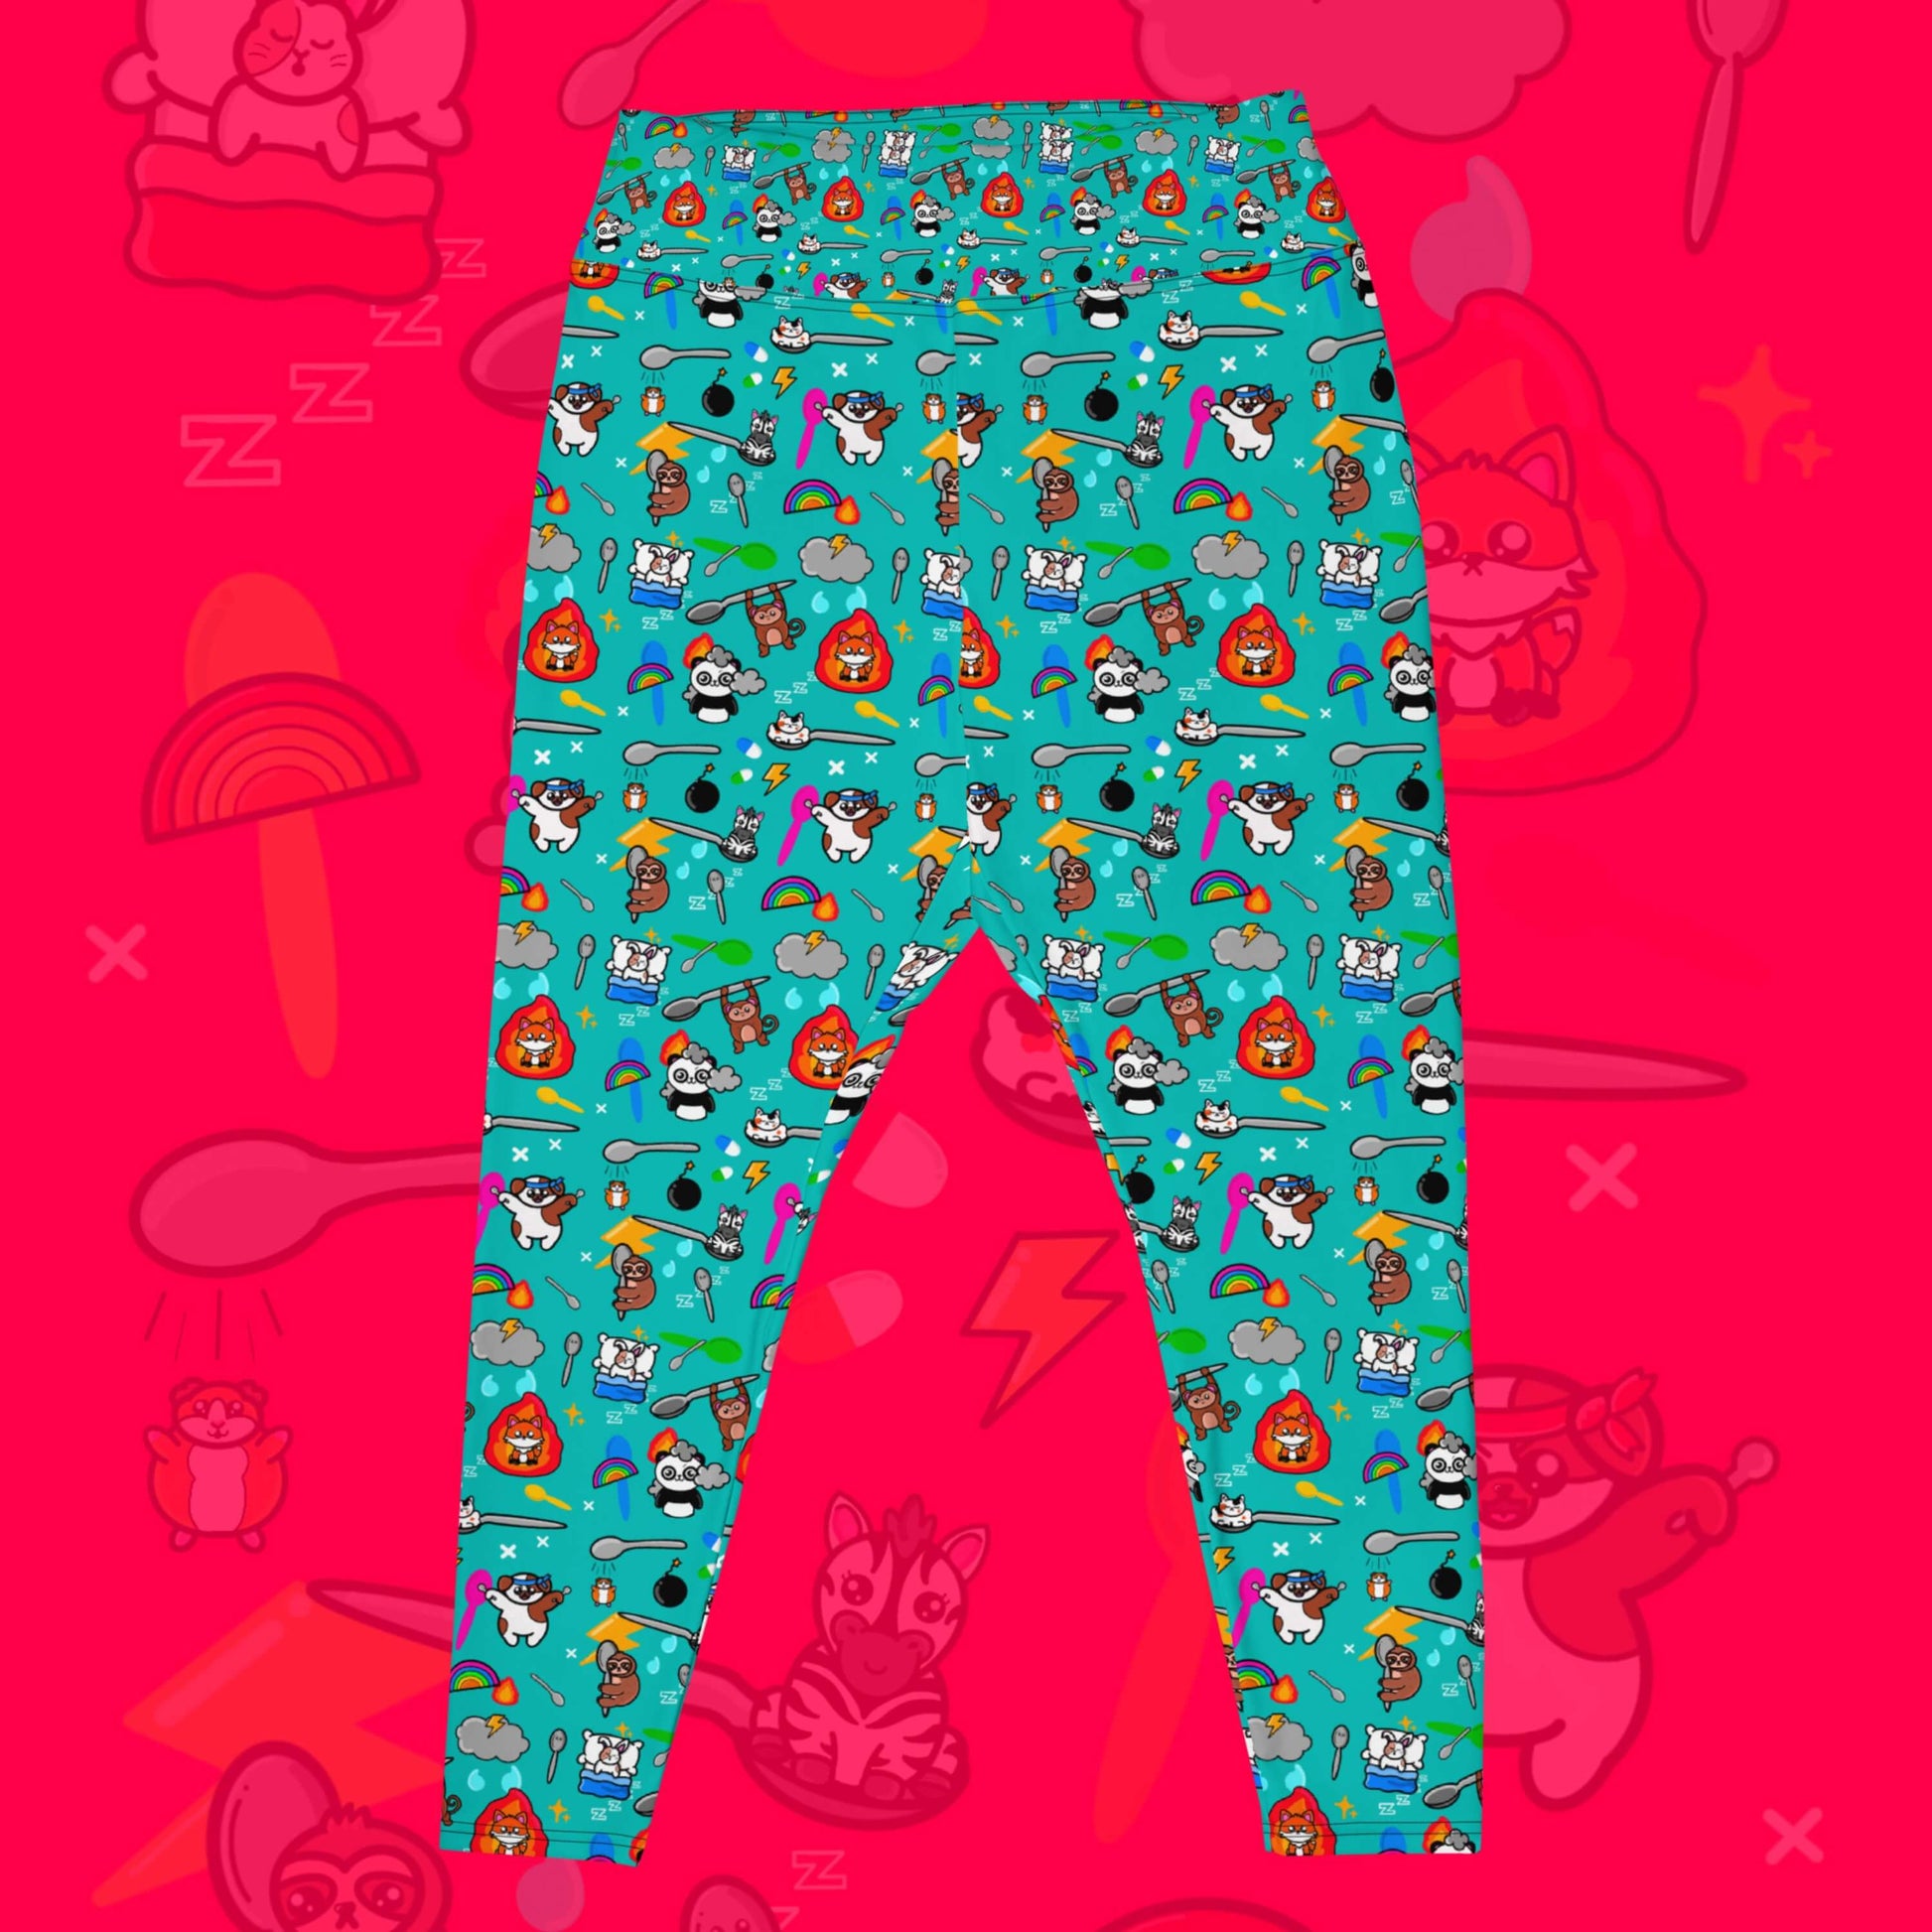 The Spoonie Plus Size Leggings on a red background with a faded version of the print in the background. The blue leggings feature various invisible illness themed animals, rainbows, spoons, sparkles, flames, pills and lightning bolts. Raising awareness for hidden disabilities.